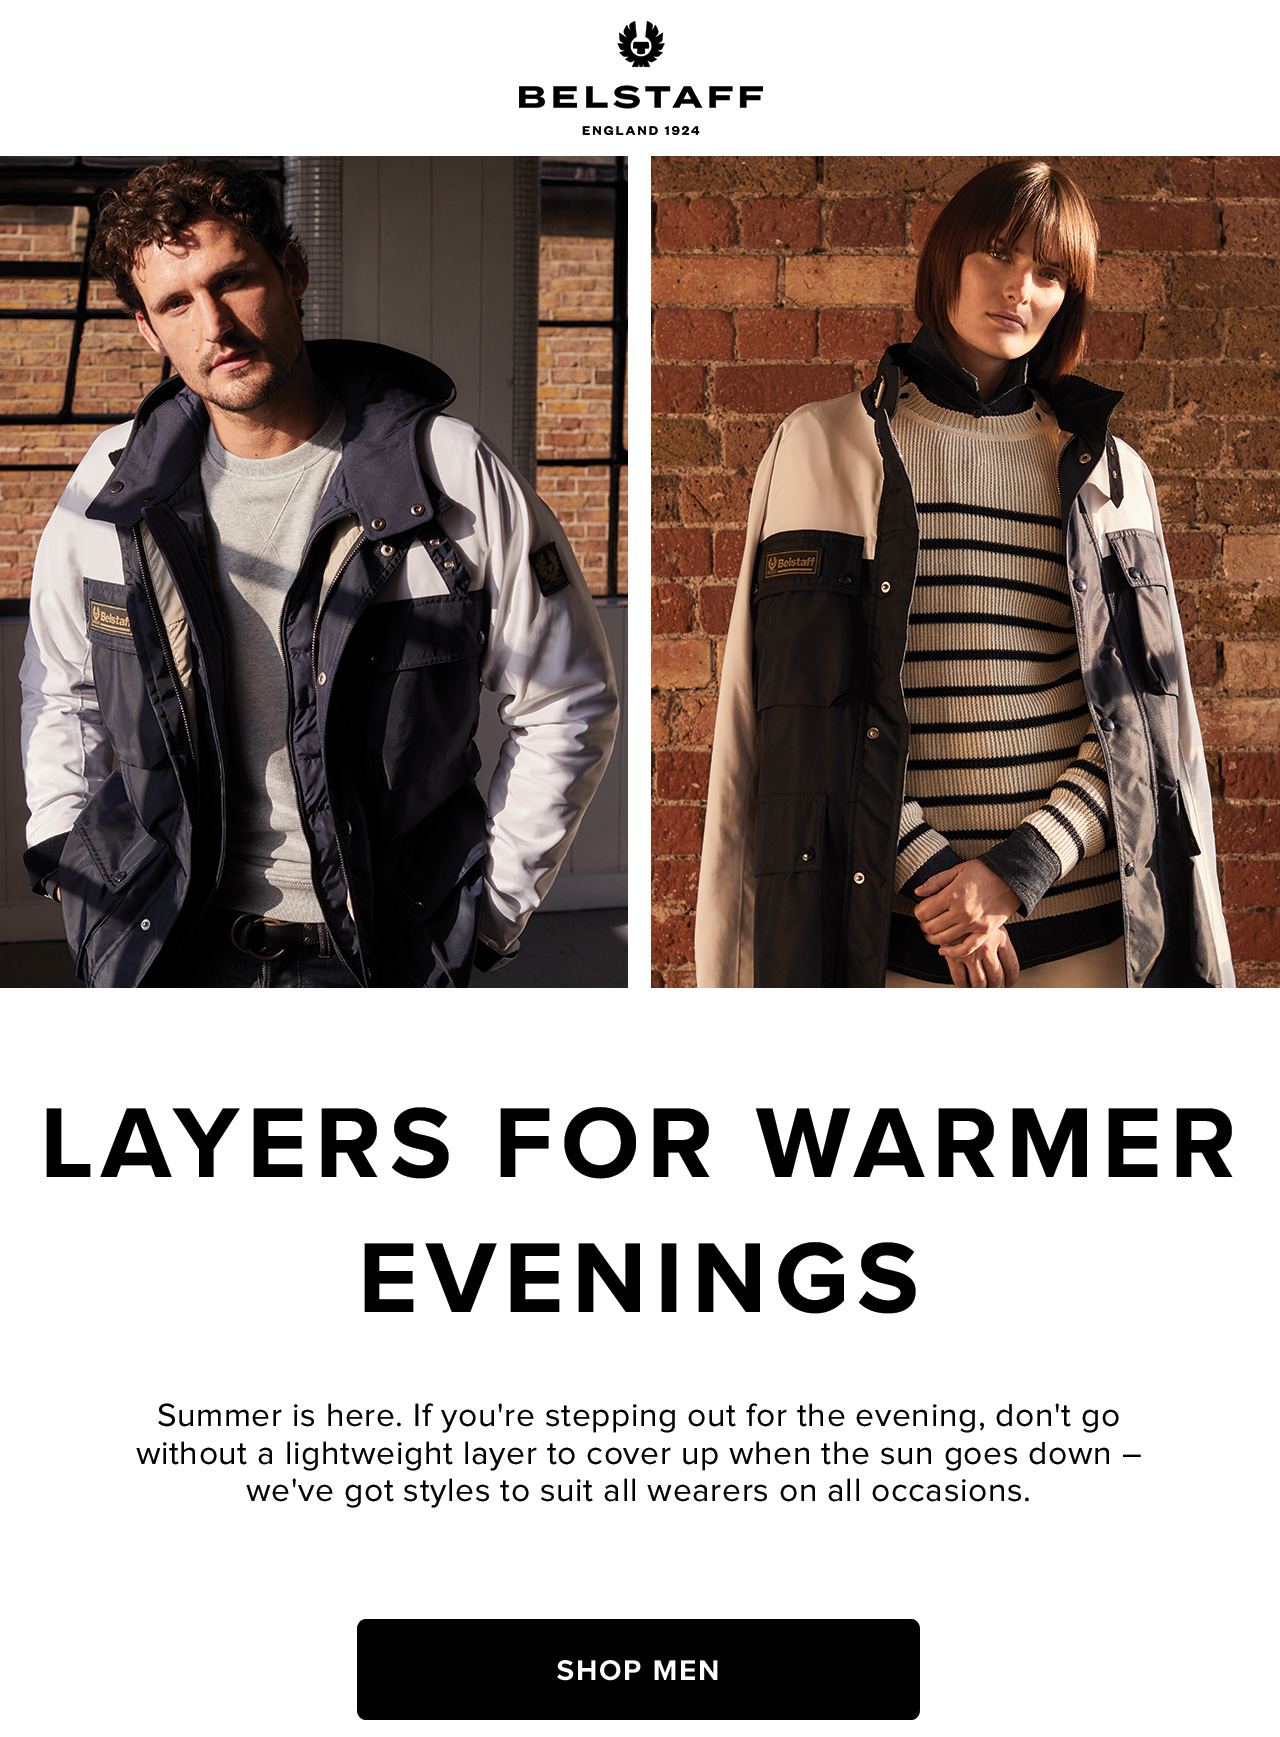 Jackets for warmer evenings